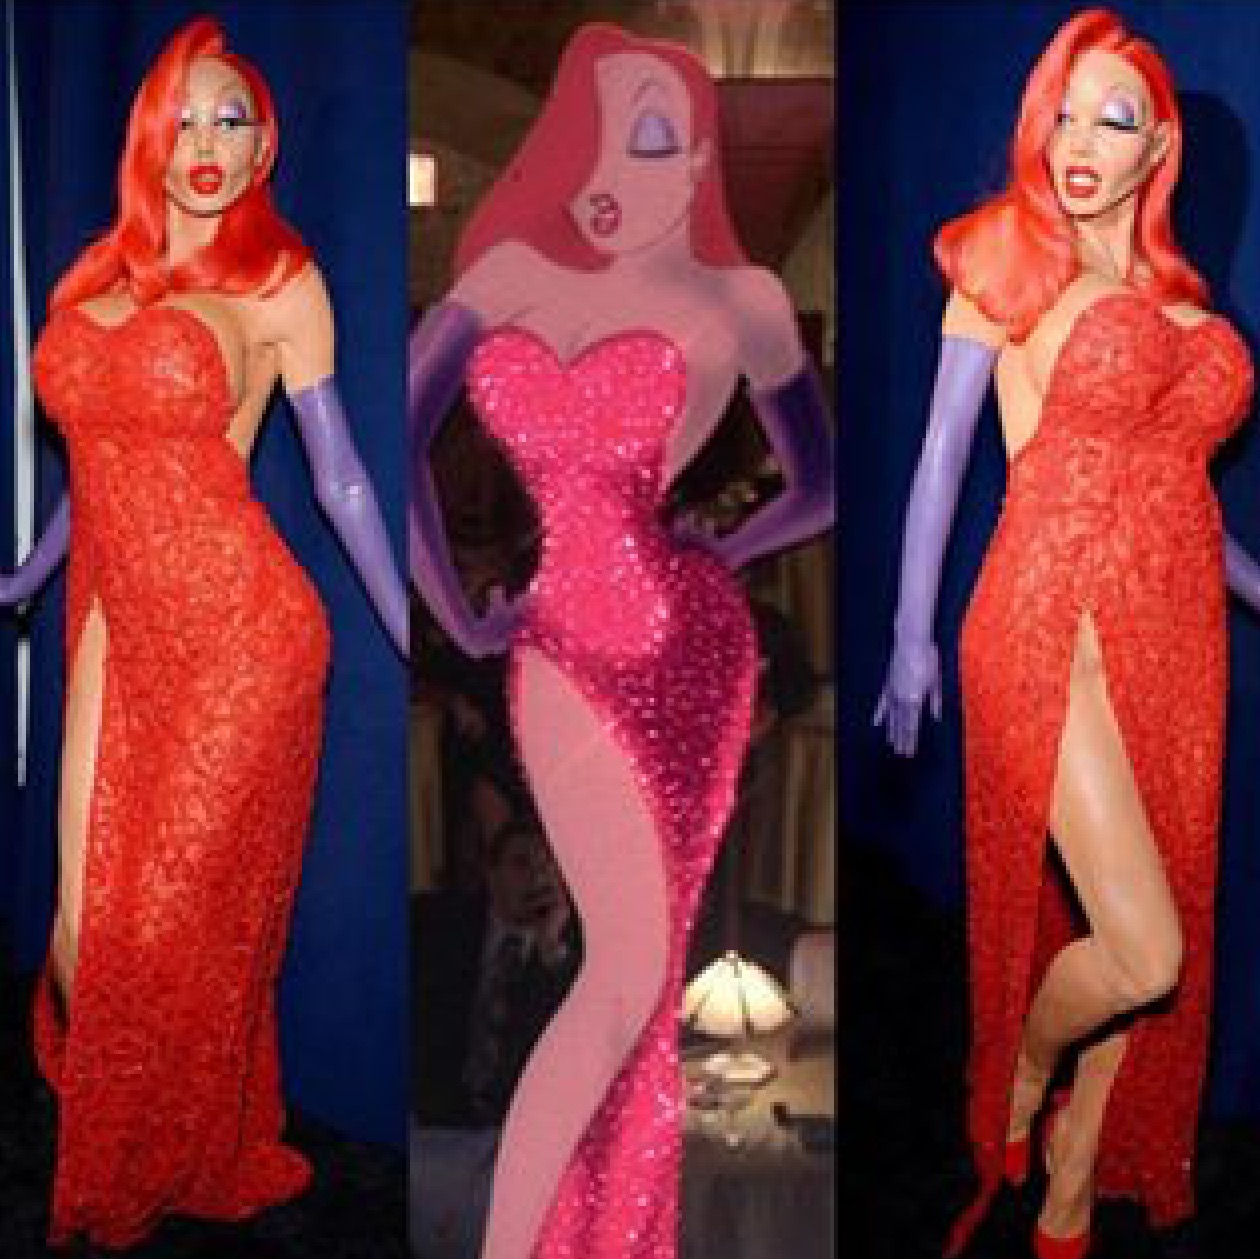 Heidi klum lives up to her tease of sexiest halloween costume yet with jess...